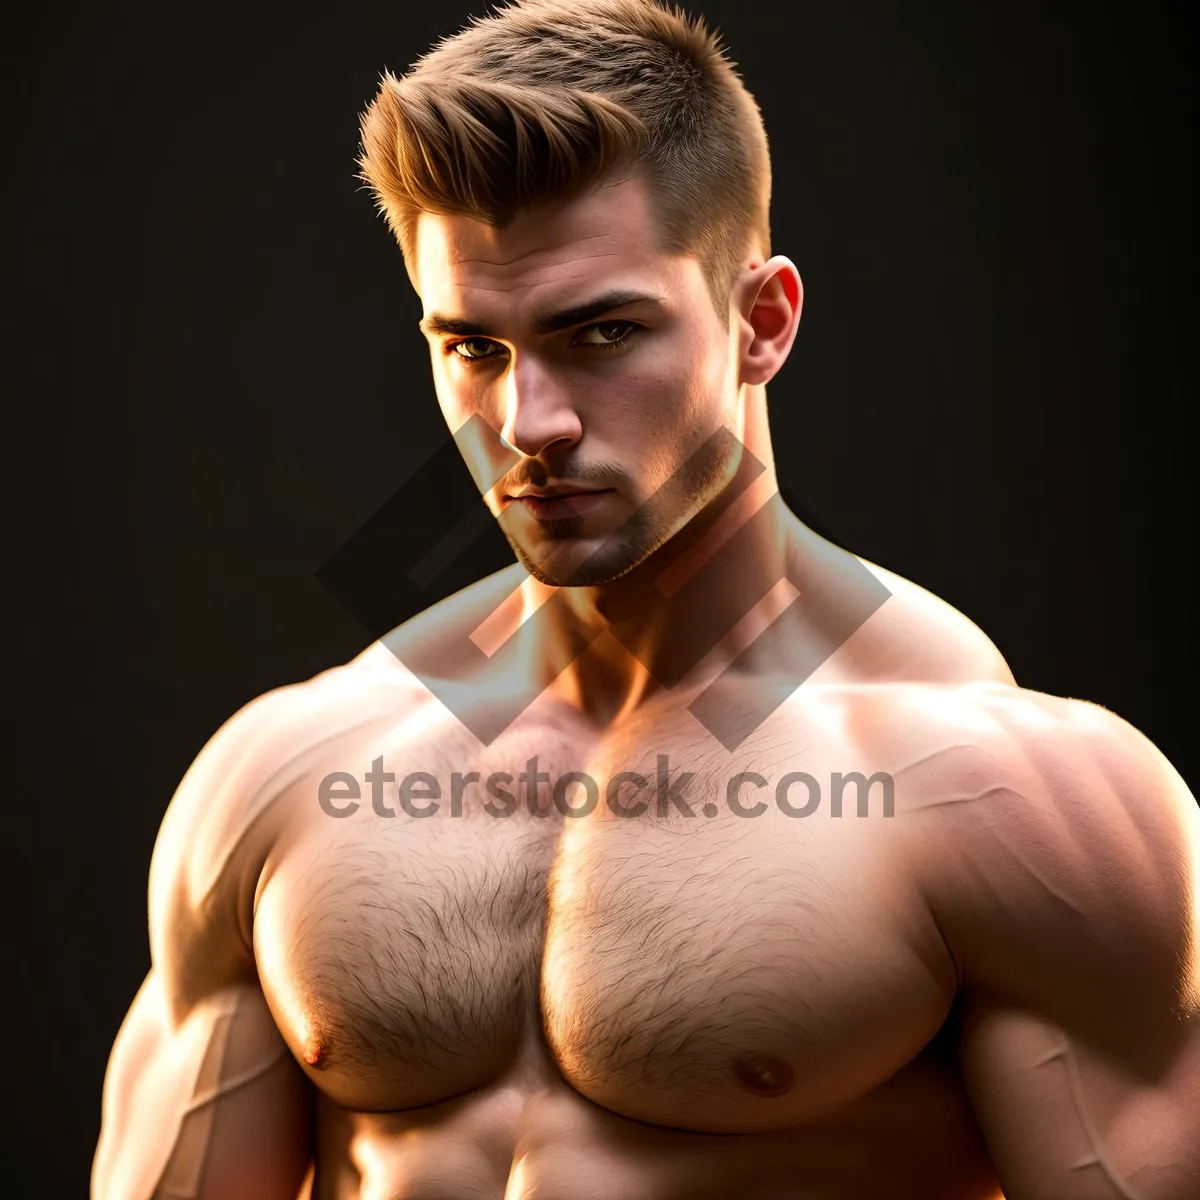 Picture of Masculine Torso: Strong, Fit, and Attractive